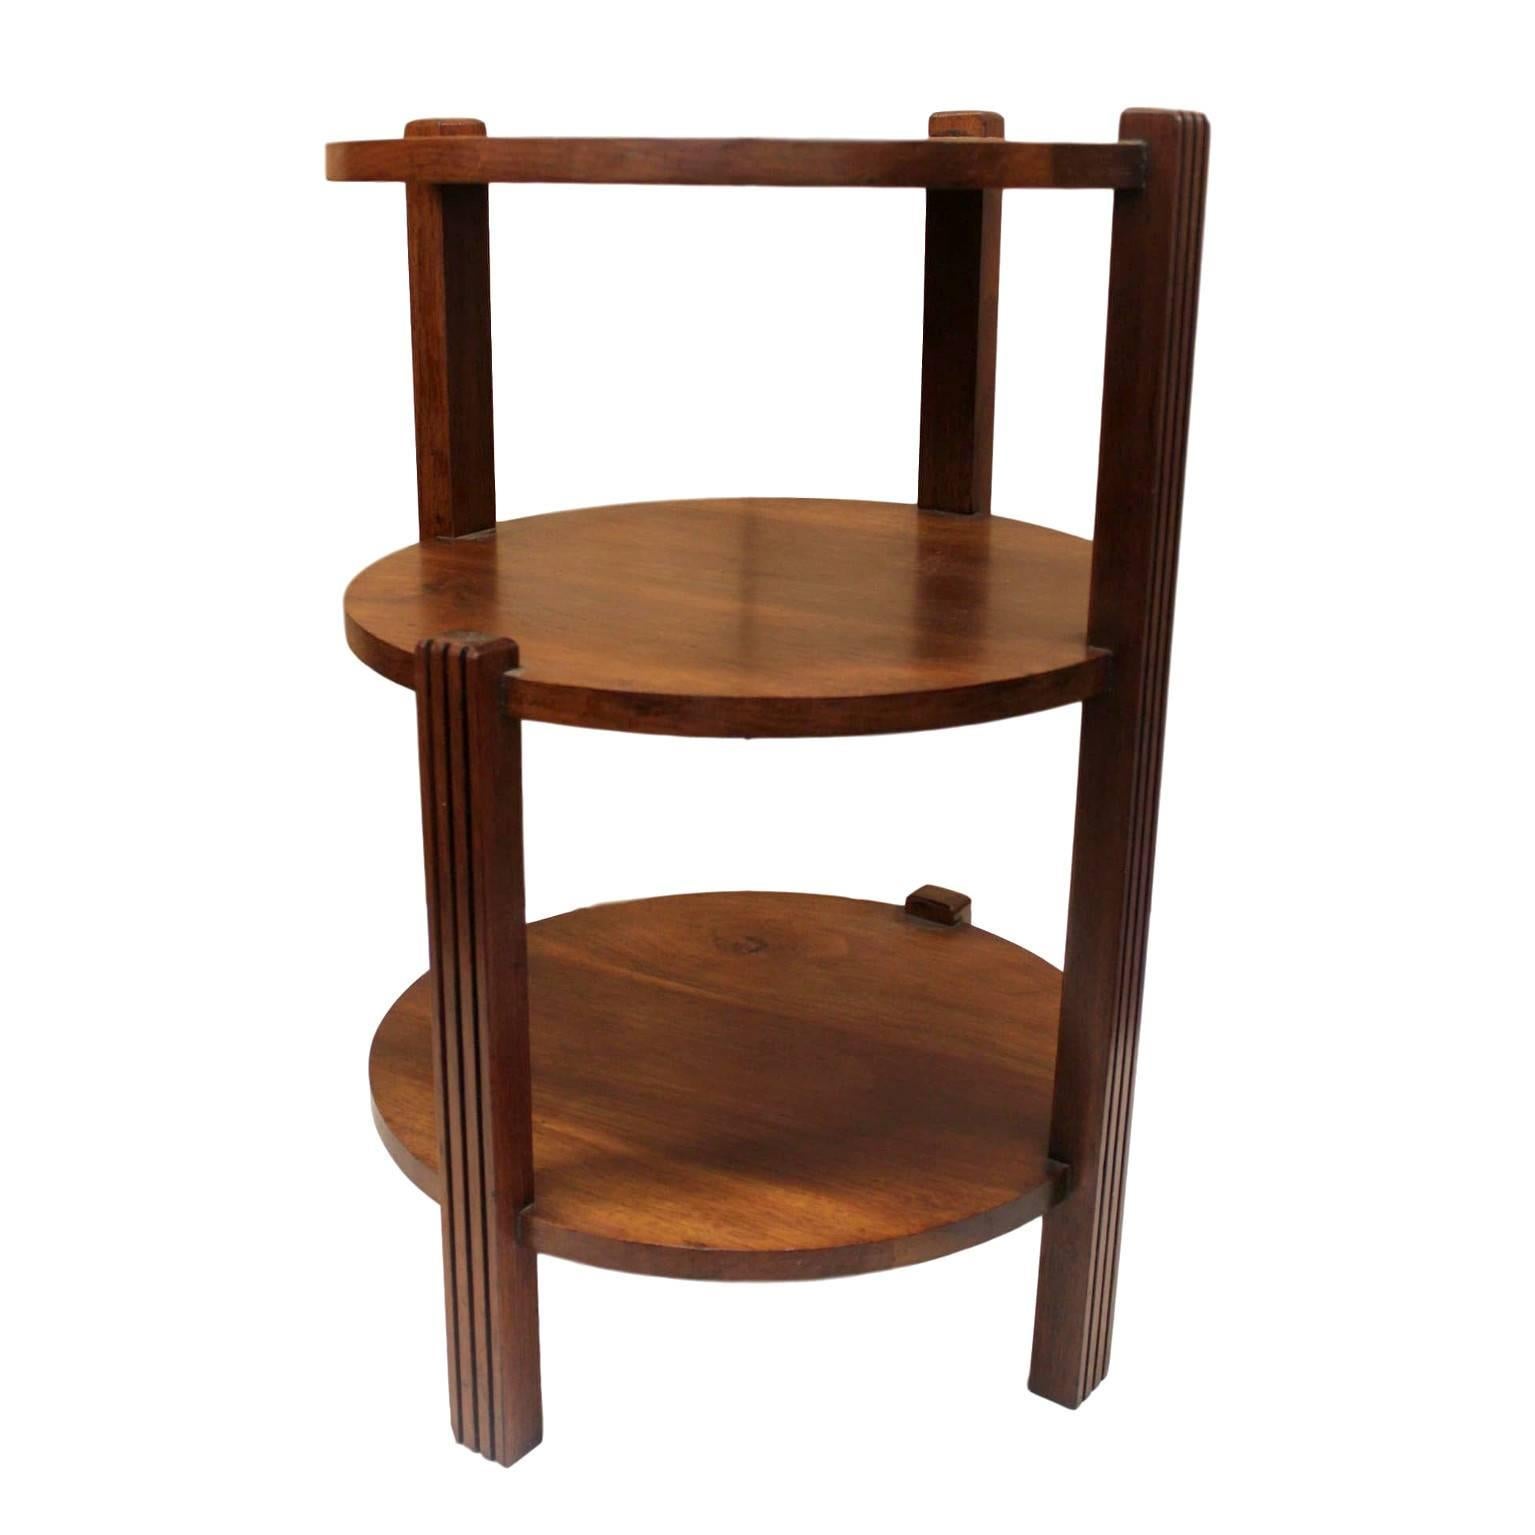 This wonderful little occasional table features three tiers of round walnut shelves supported by five legs/supports. These supports are arranged in a unique staggered fashion that gives the table's profile an interesting 